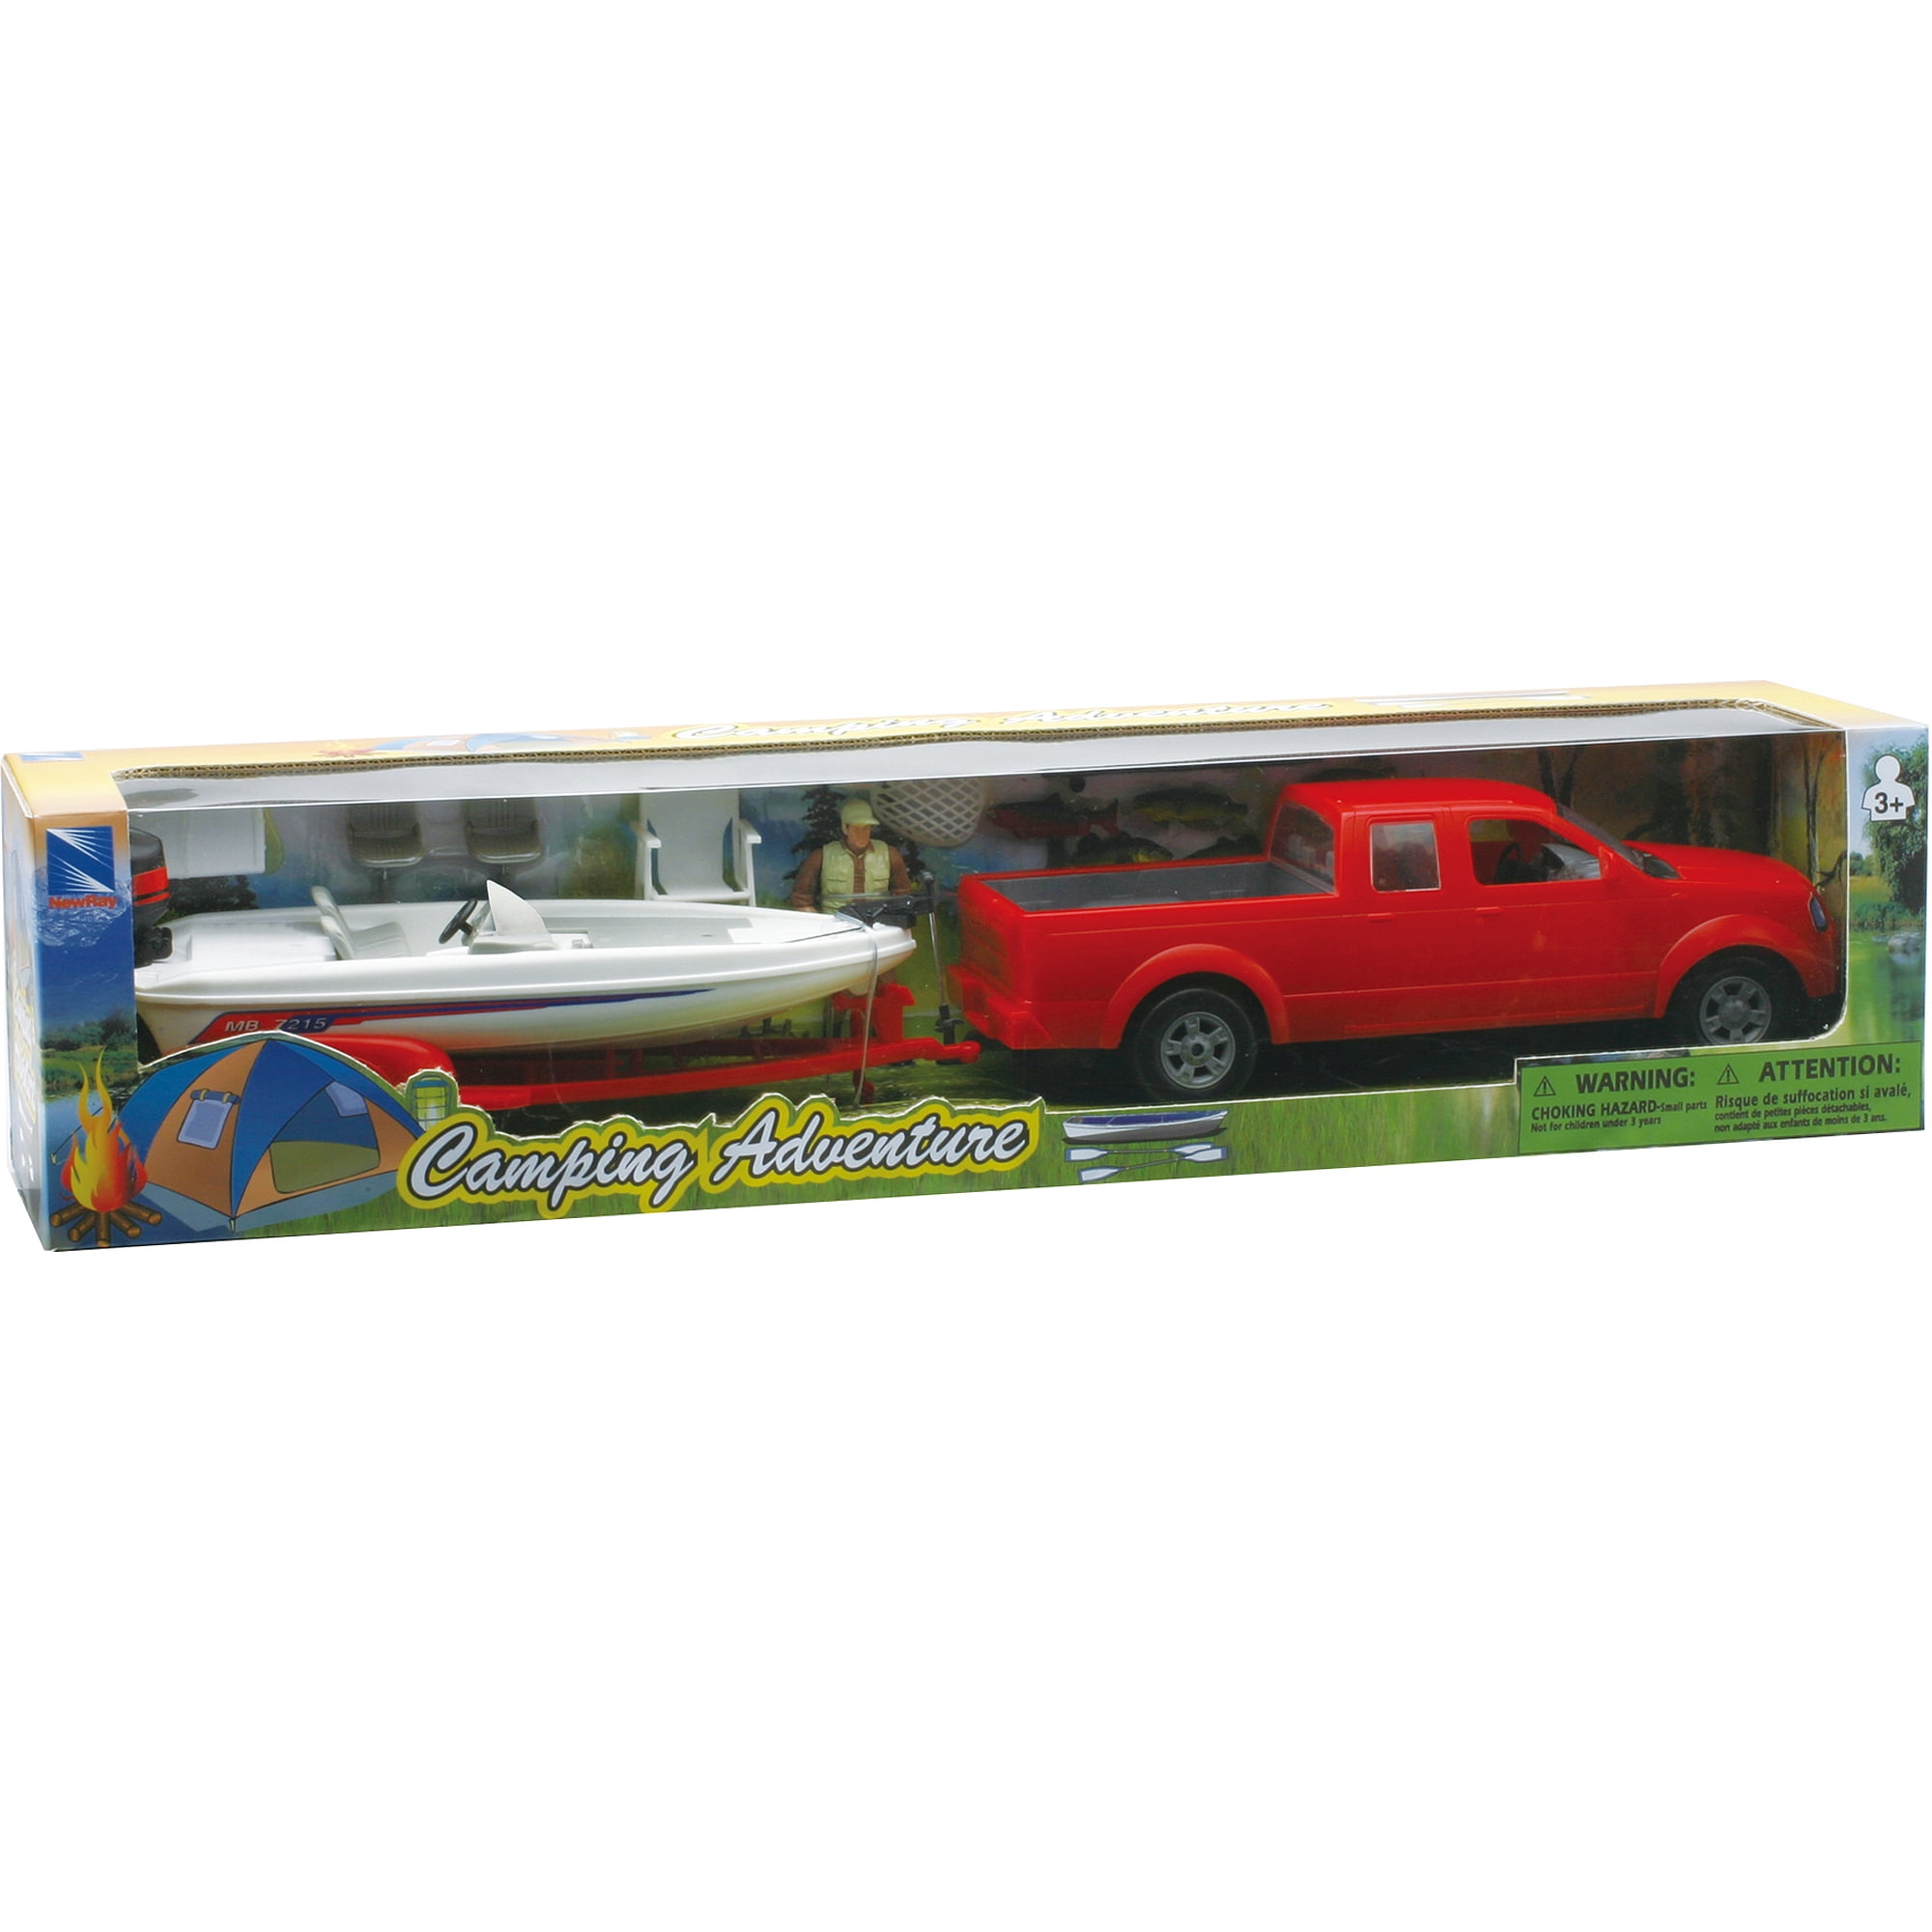 toy truck sets